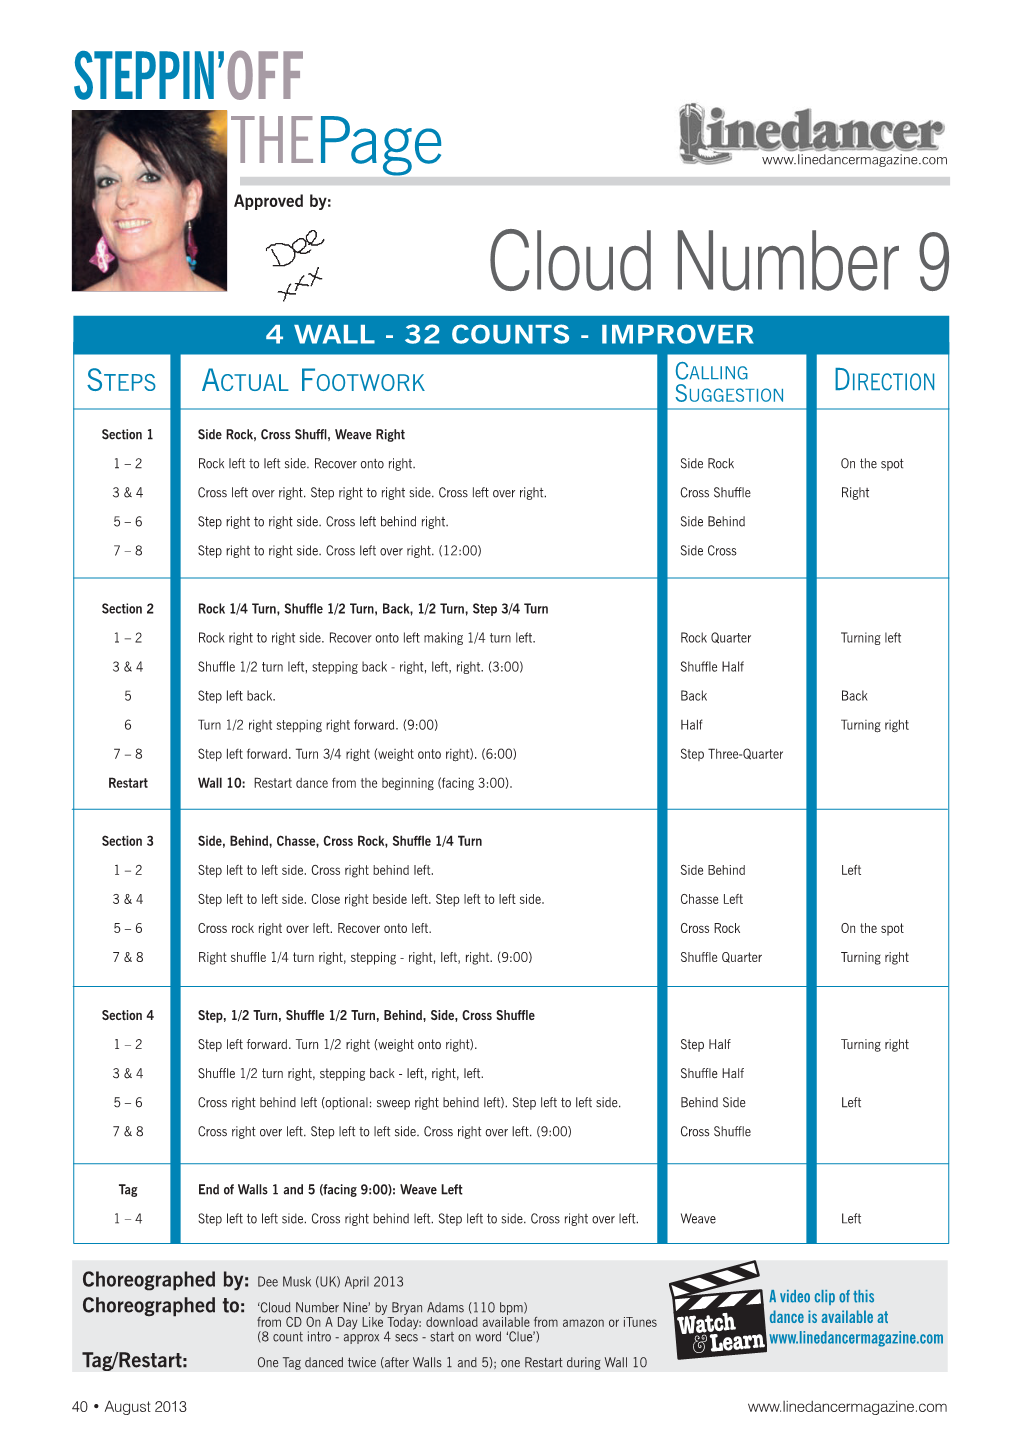 Cloud Number 9 4 WALL - 32 COUNTS - IMPROVER